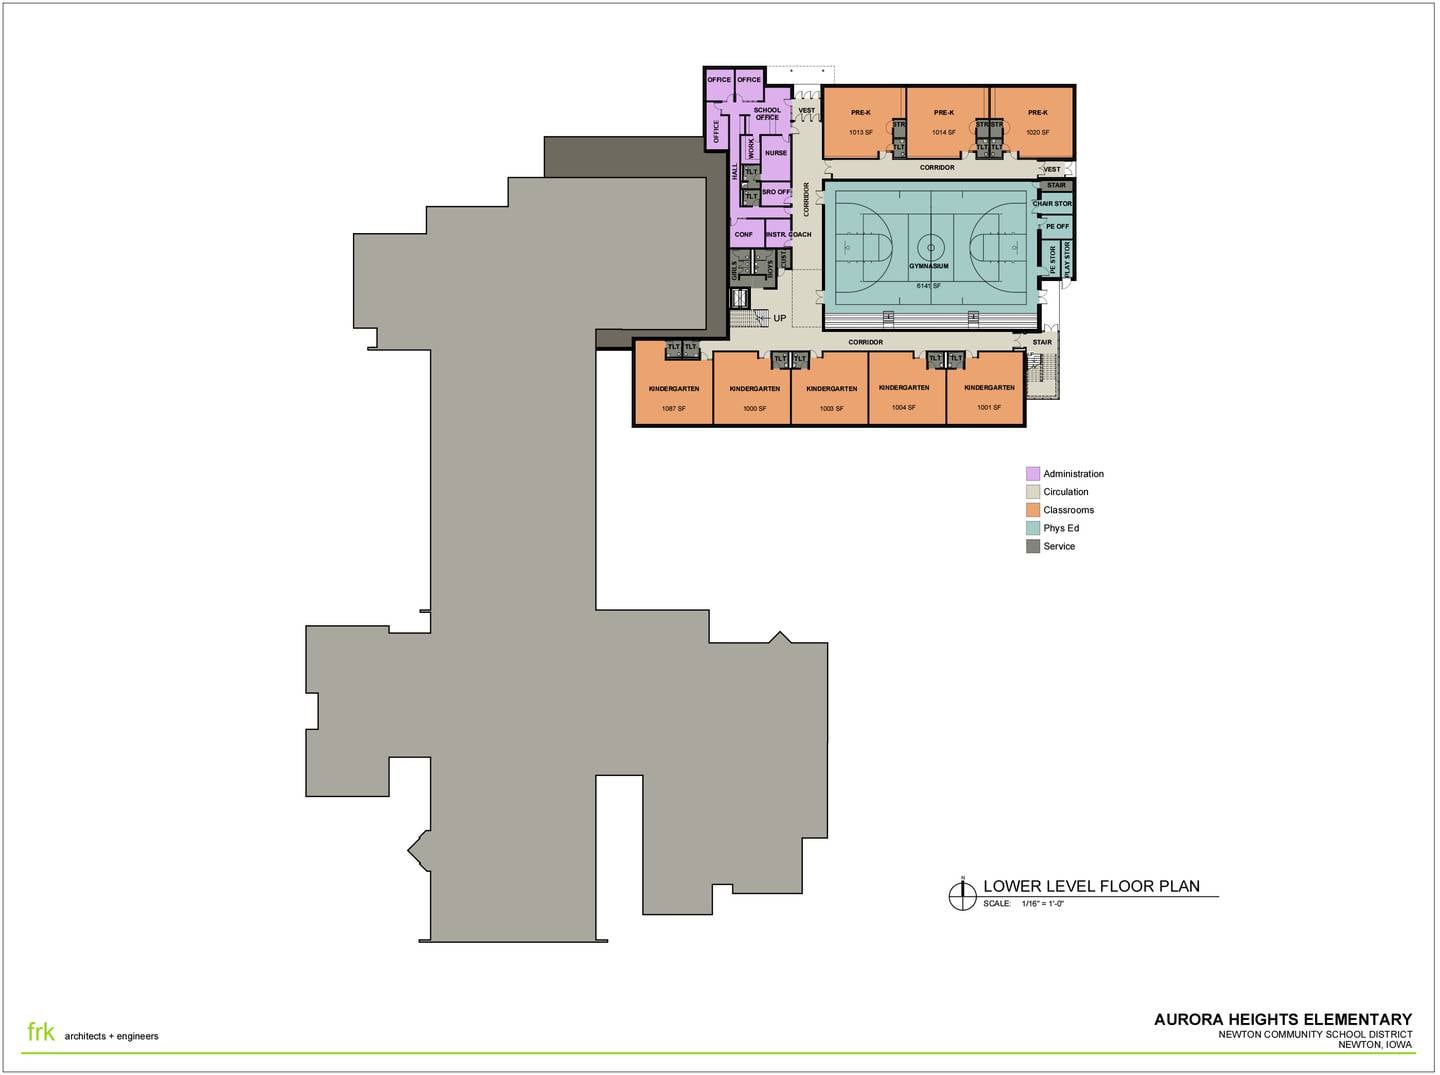 Site plans of the lower level of the new Aurora Heights Elementary School provide five classrooms for kindergarterns and three classrooms for preschool.